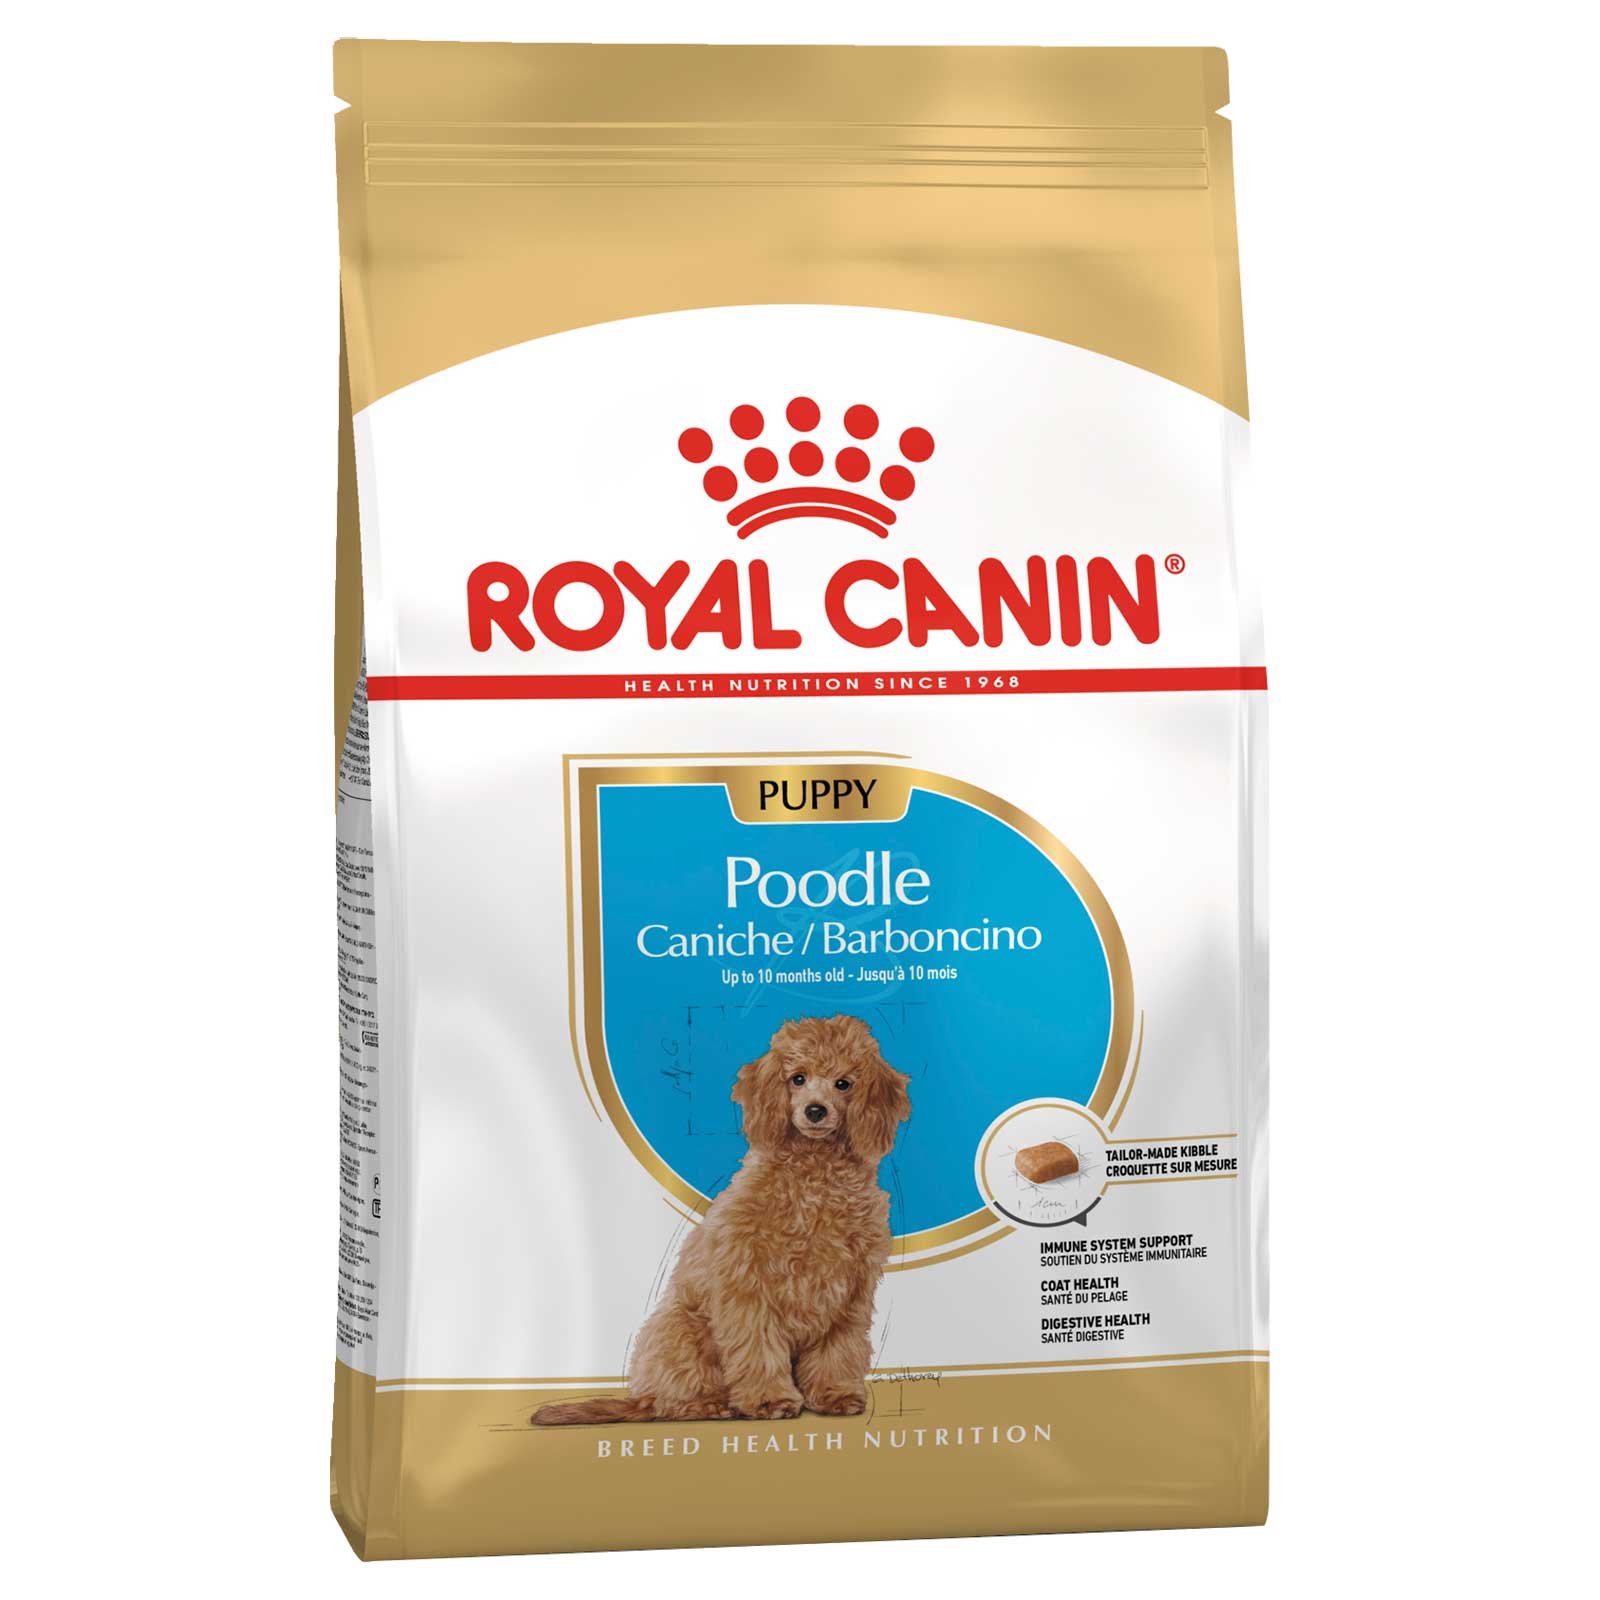 Royal Canin Dog Food Puppy Poodle